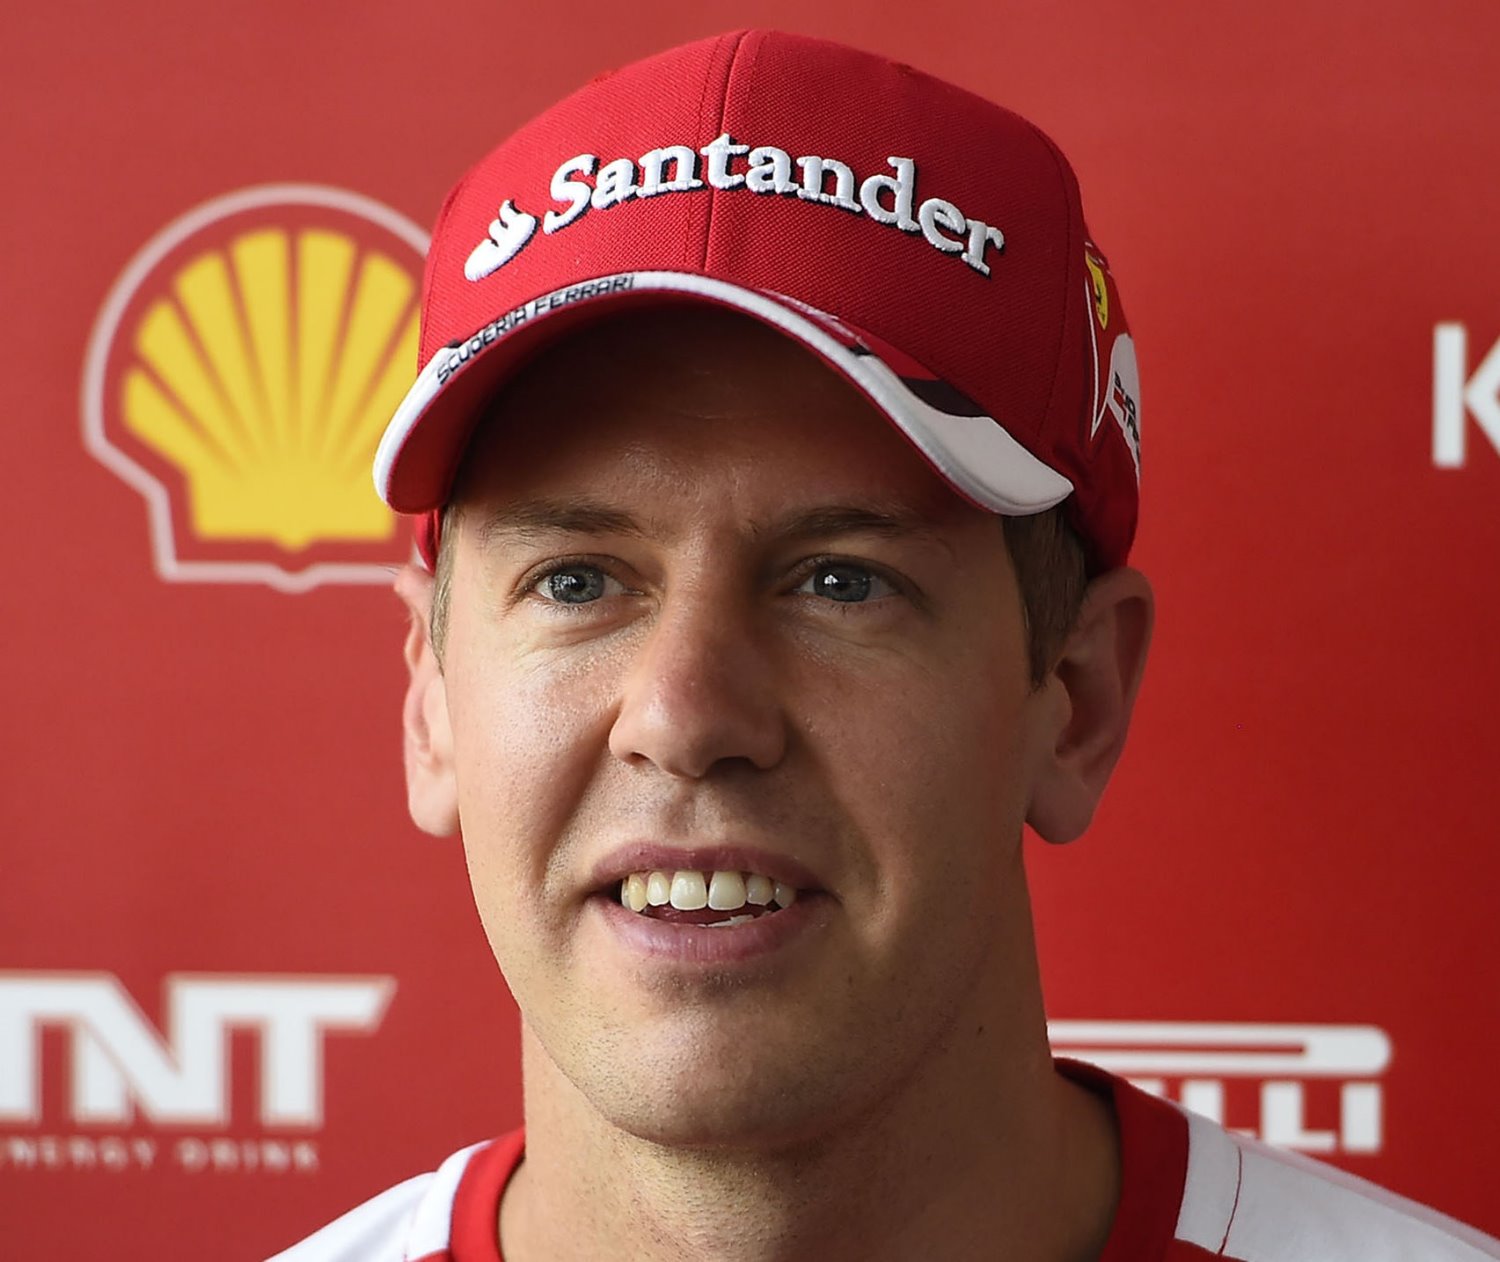 No long vacations for Vettel